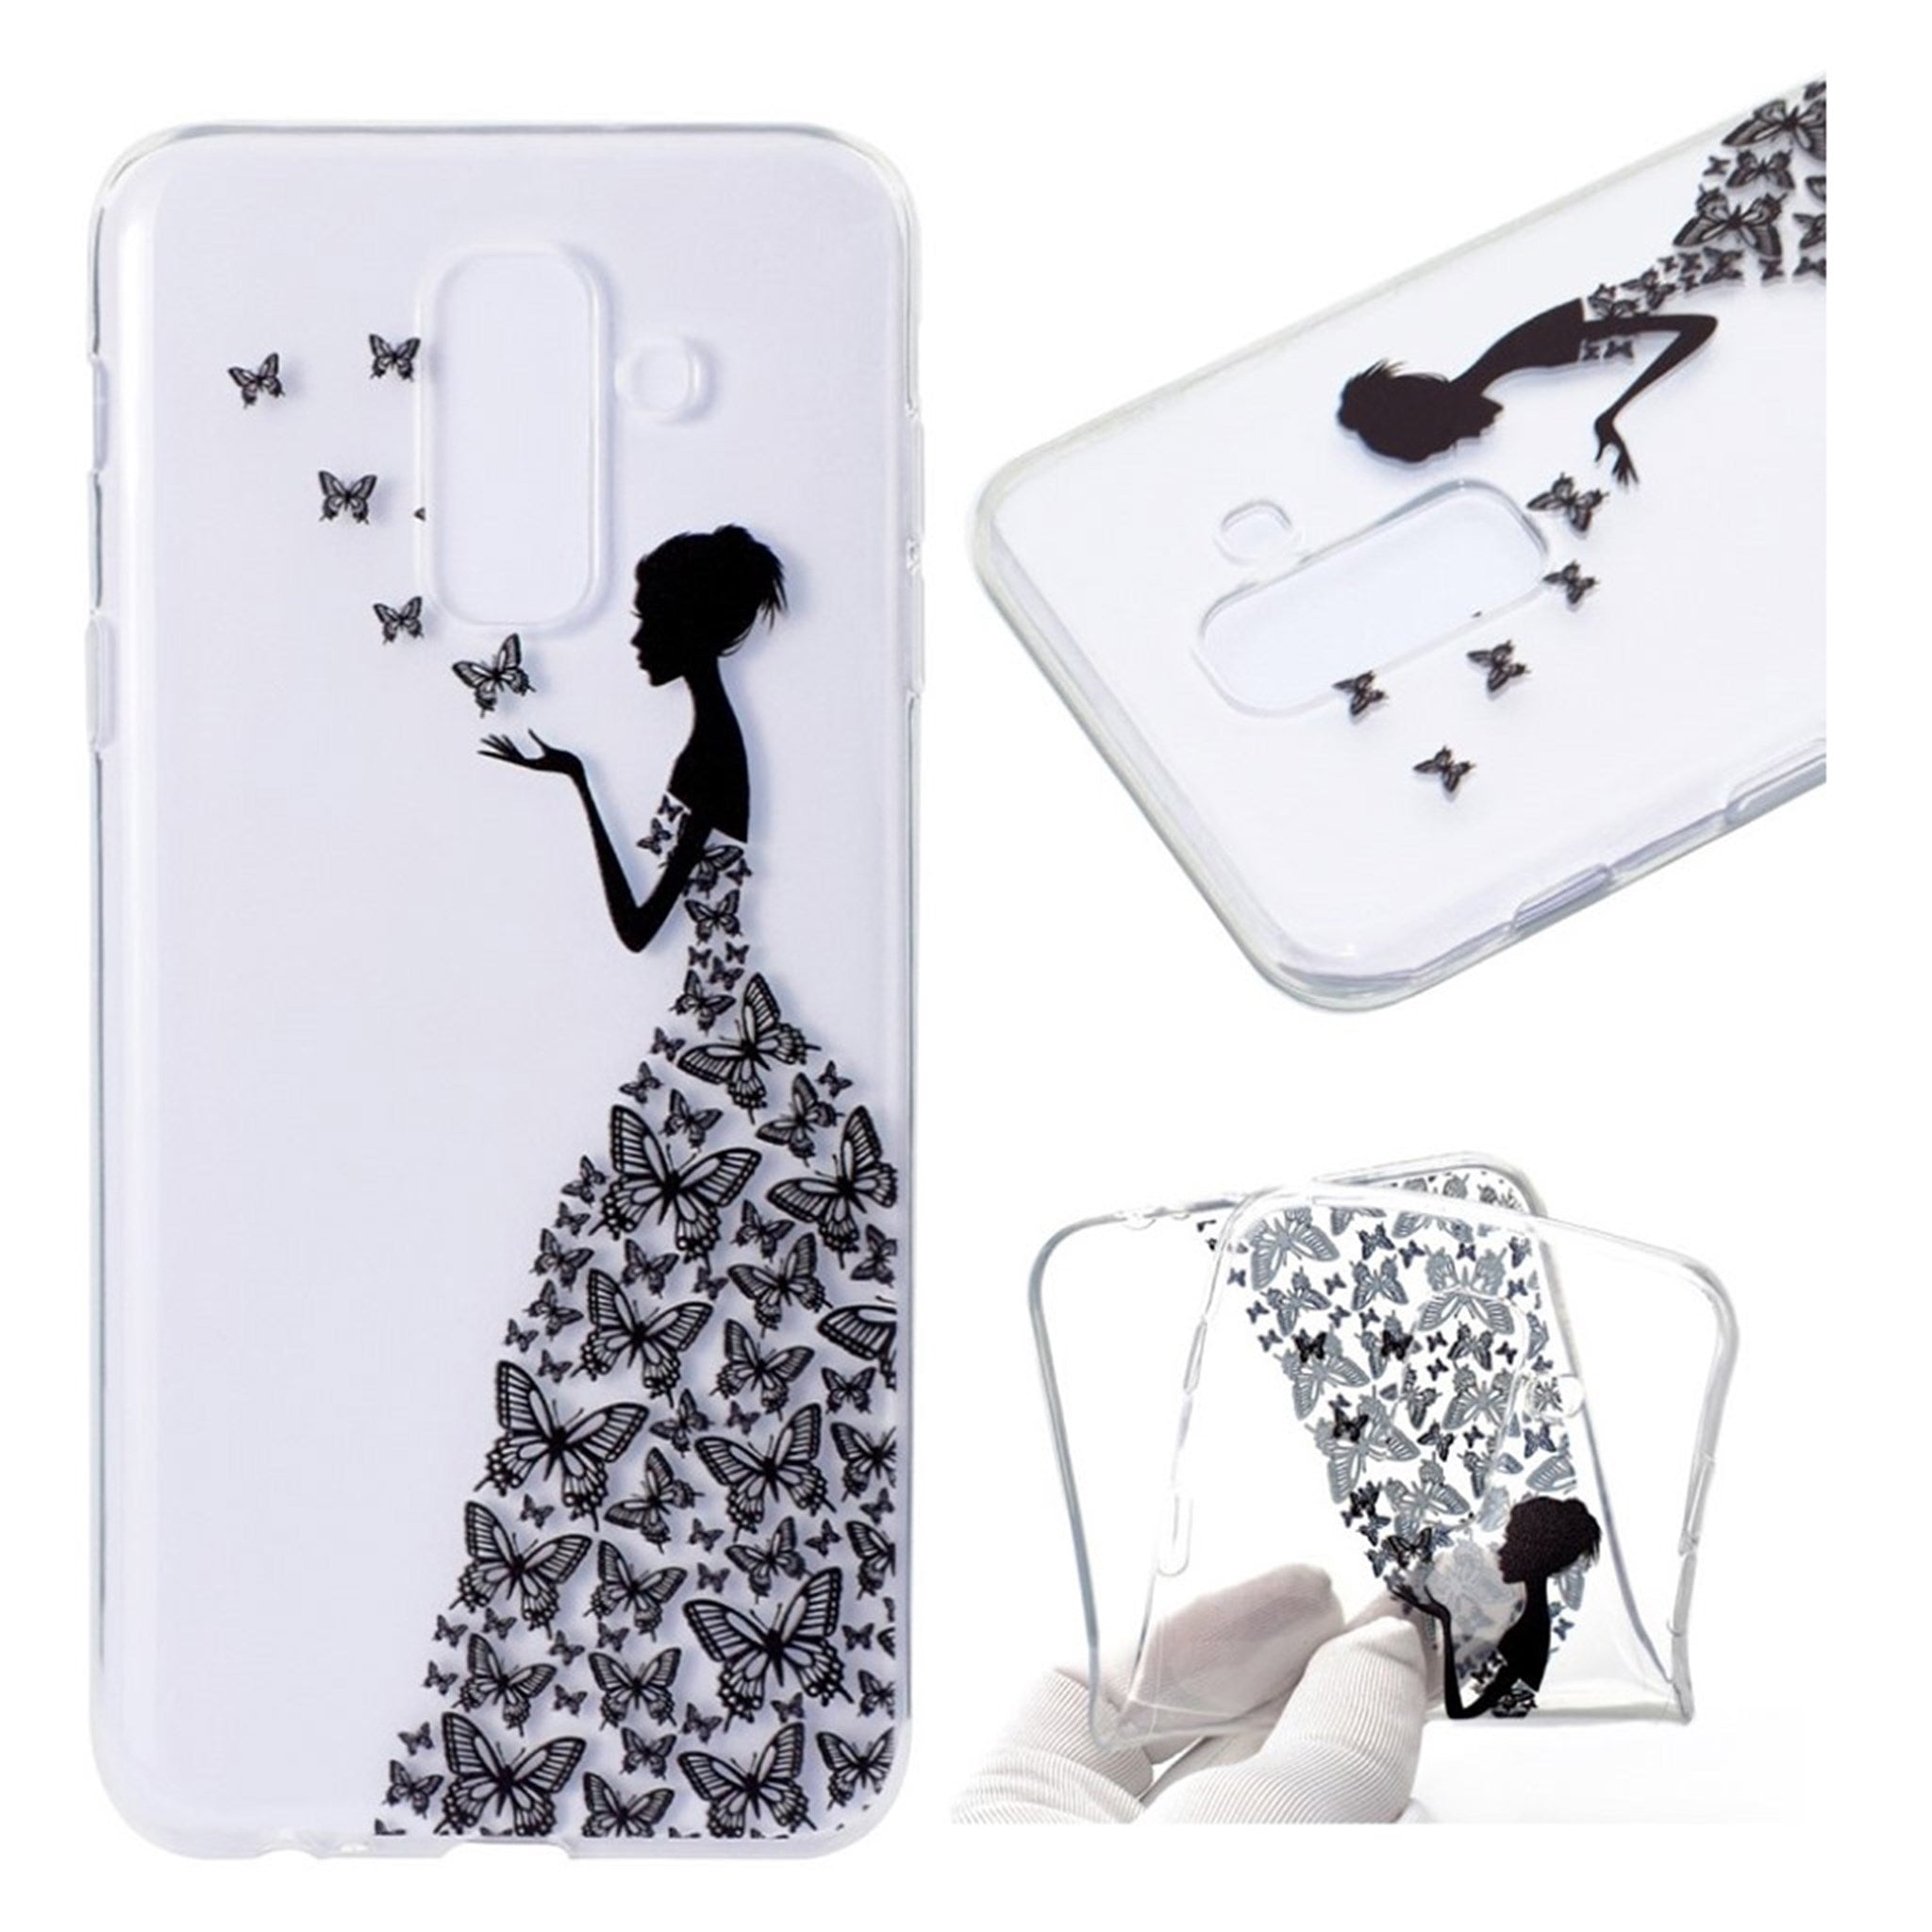 Samsung Galaxy A6 Plus pattern printing soft case - Butterfly and Beauty